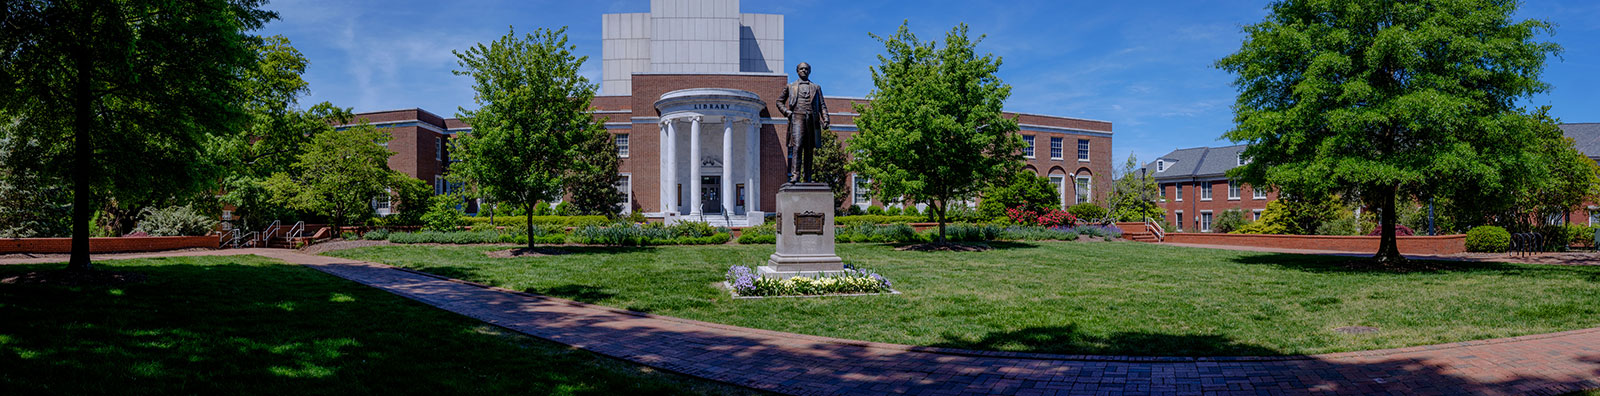 Panoramic shot of McIver statue and Jackson Library